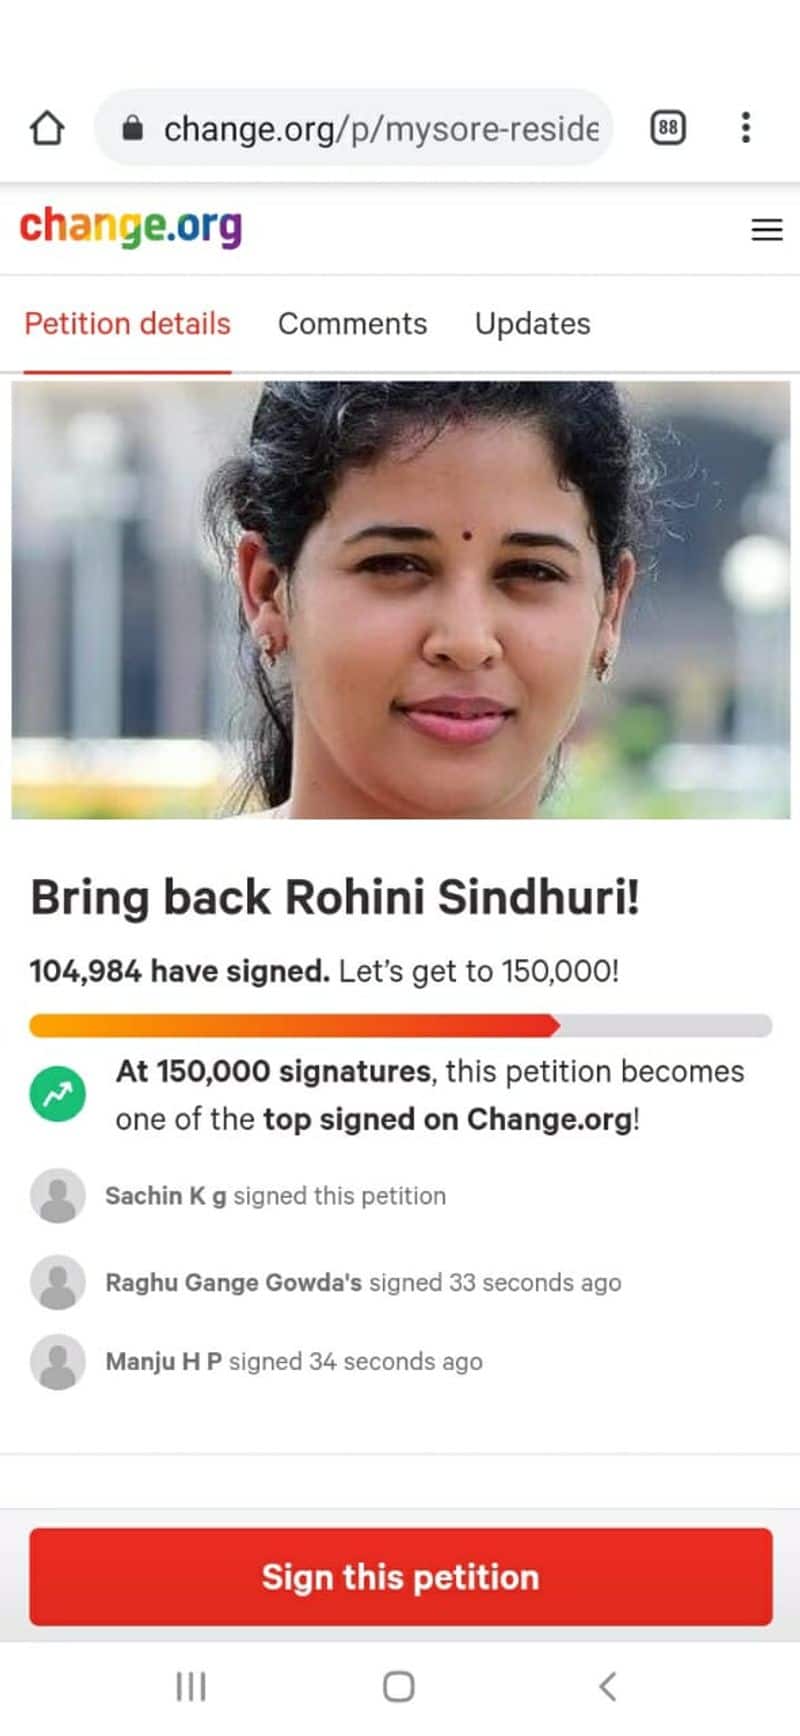 Lakhs Of People Supports Bring Back  Campaign For IAS Rohini sindhuri snr